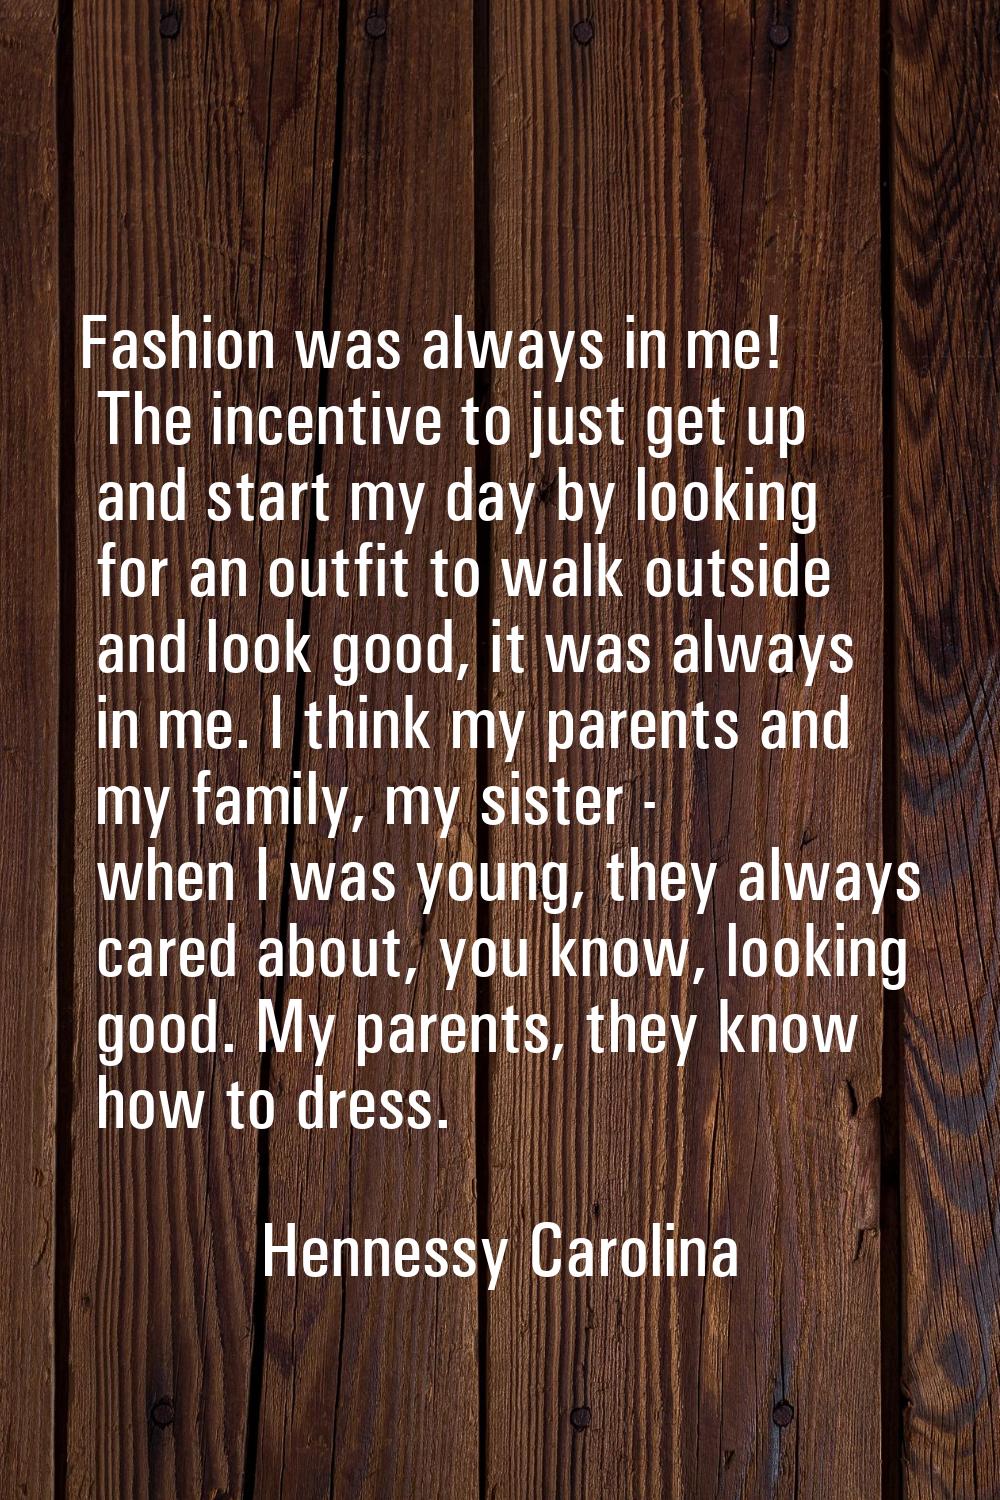 Fashion was always in me! The incentive to just get up and start my day by looking for an outfit to